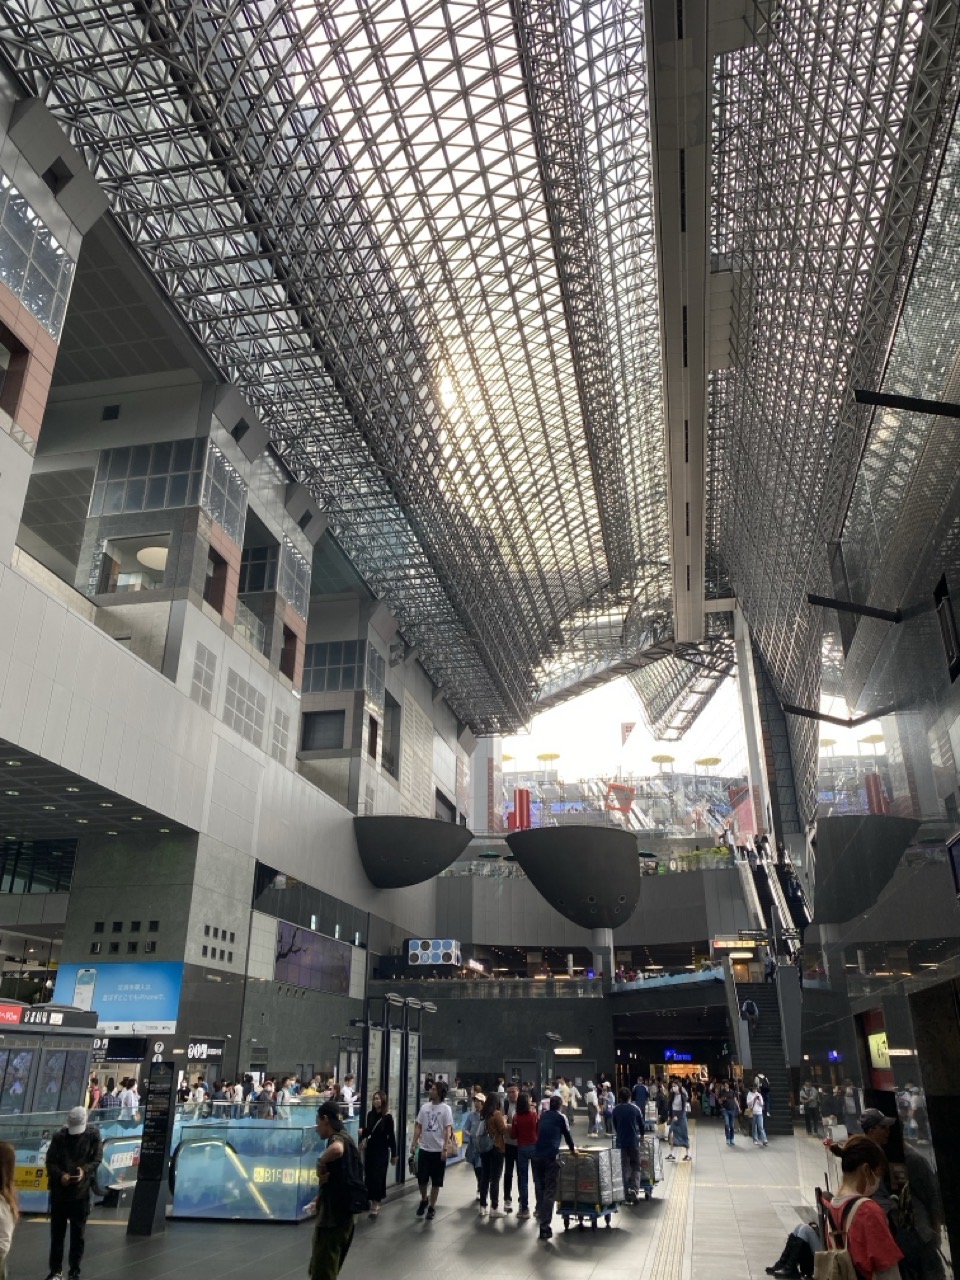 A view of Kyoto station’s high ceiling